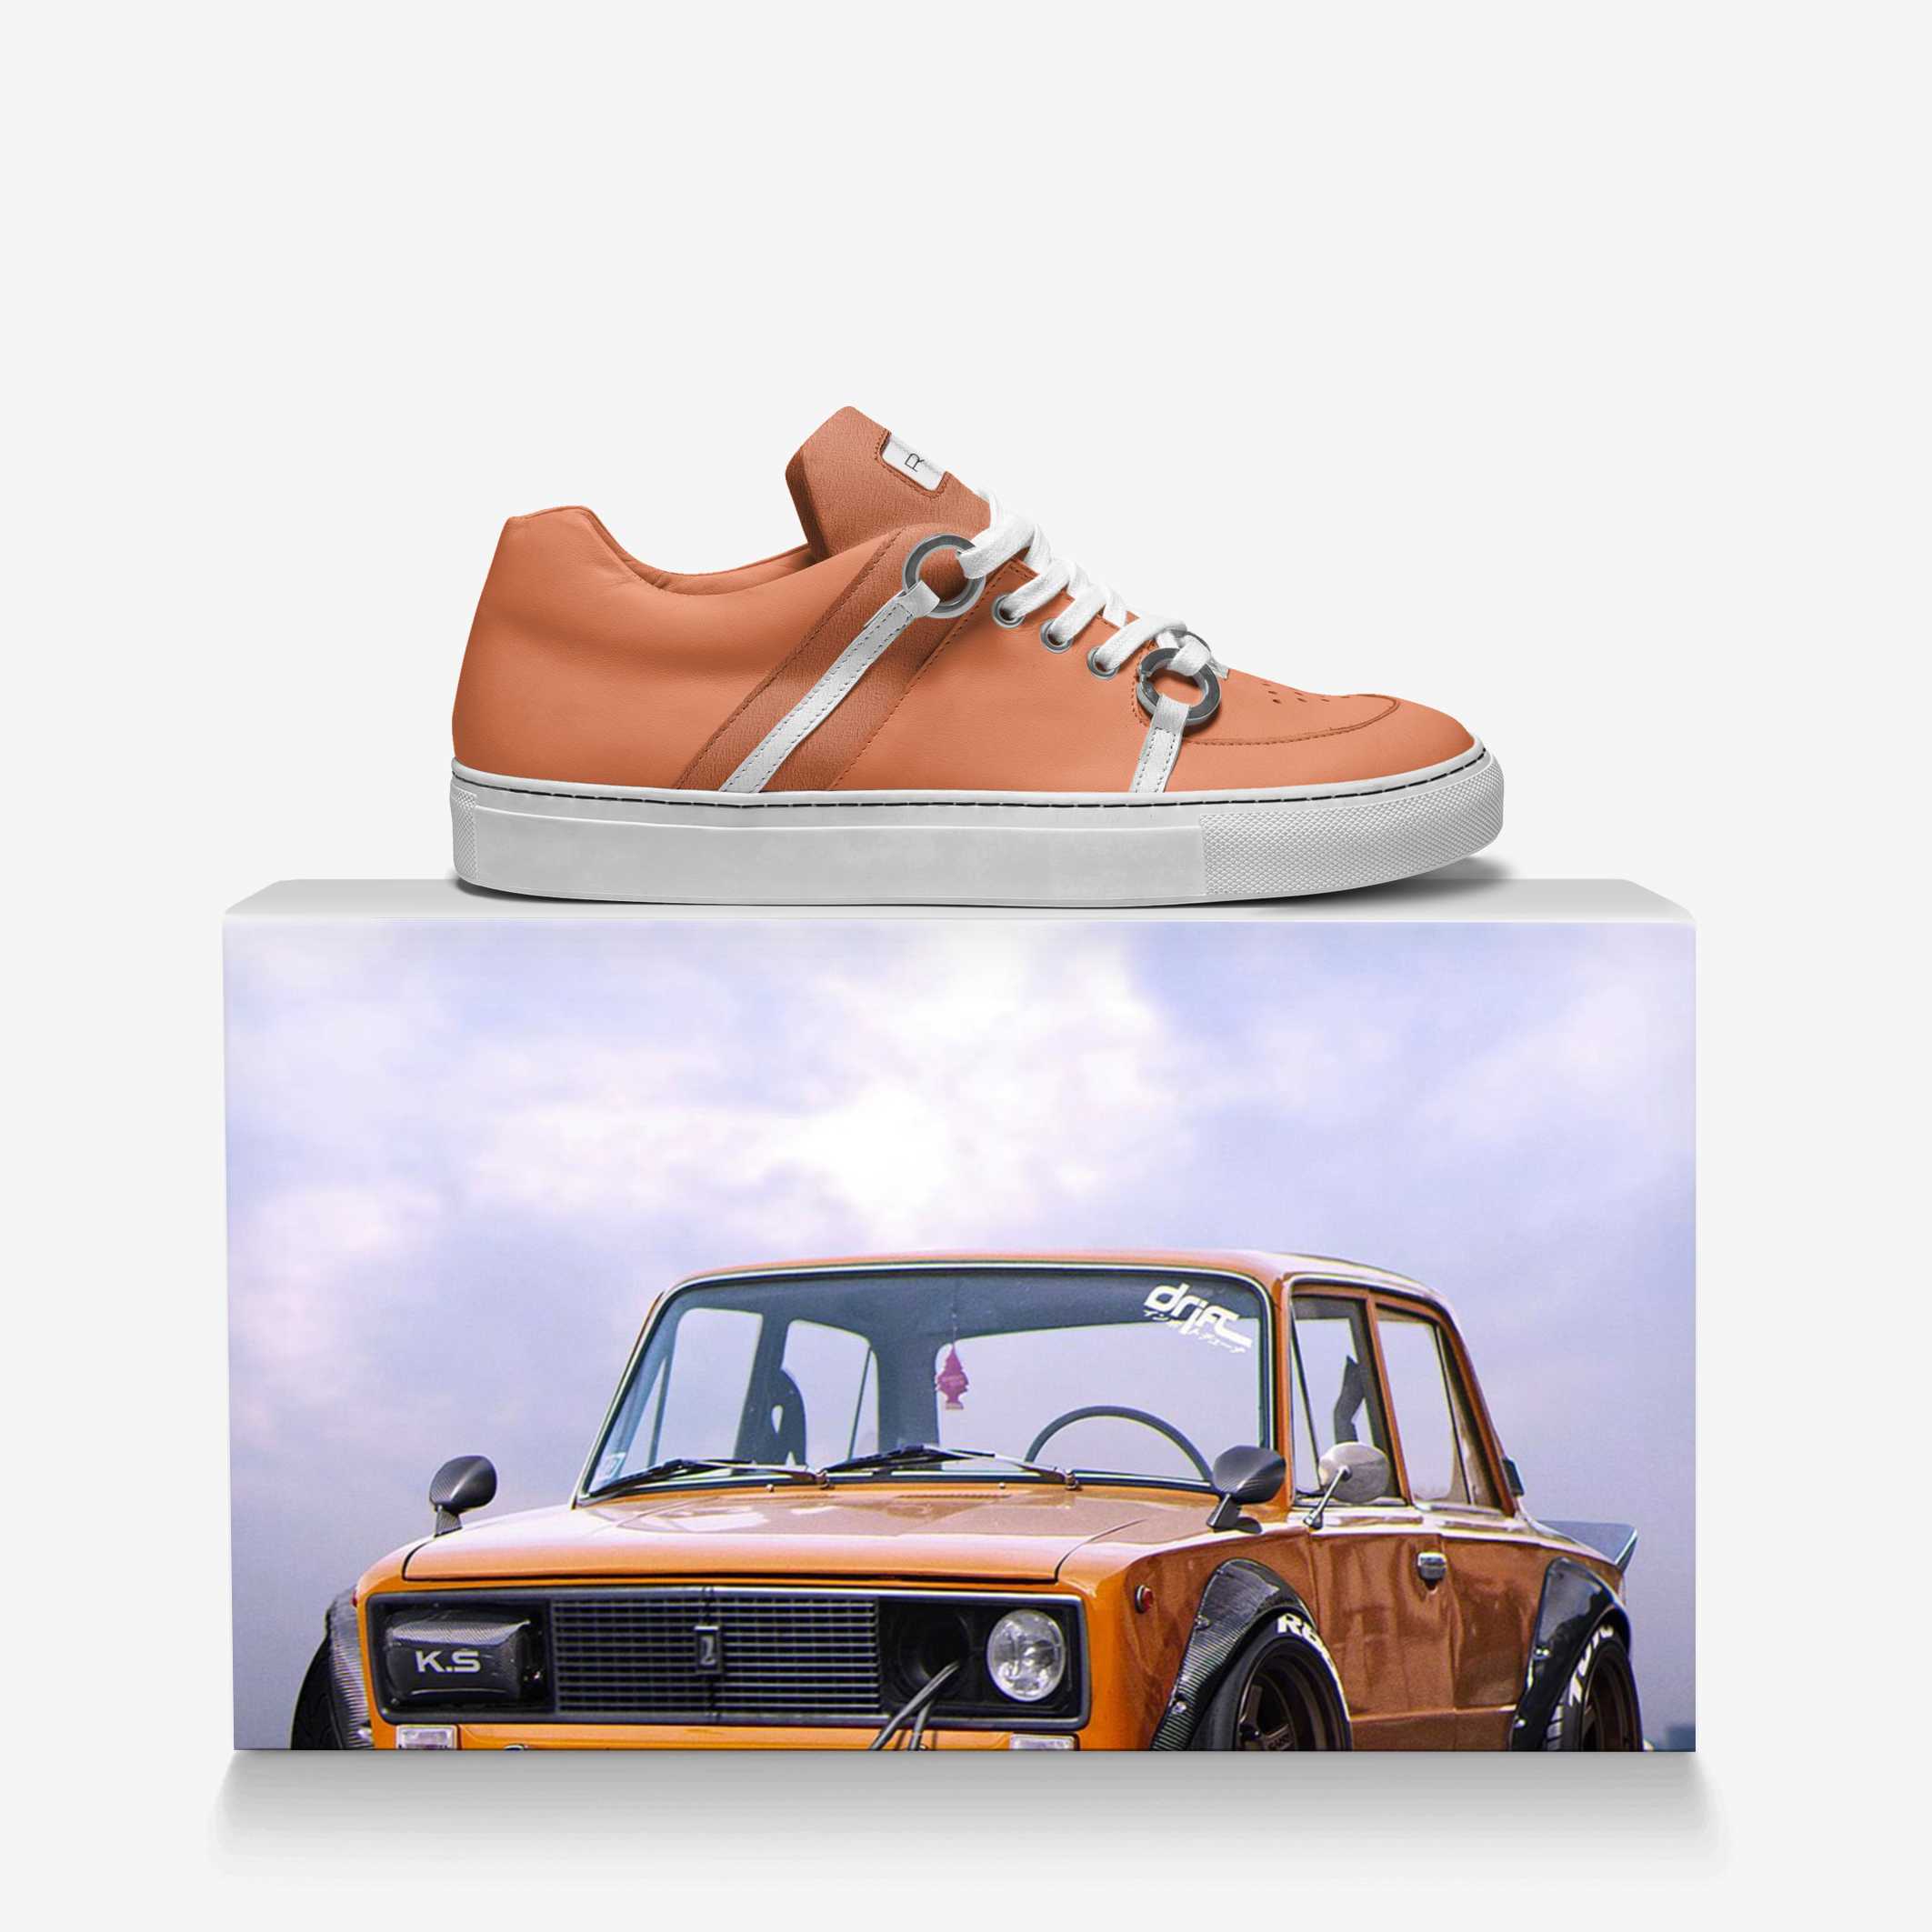 '76 LADA DRIFTER (From The 305 Collection) - Riddick Shoes Shoe Riddick Shoes   